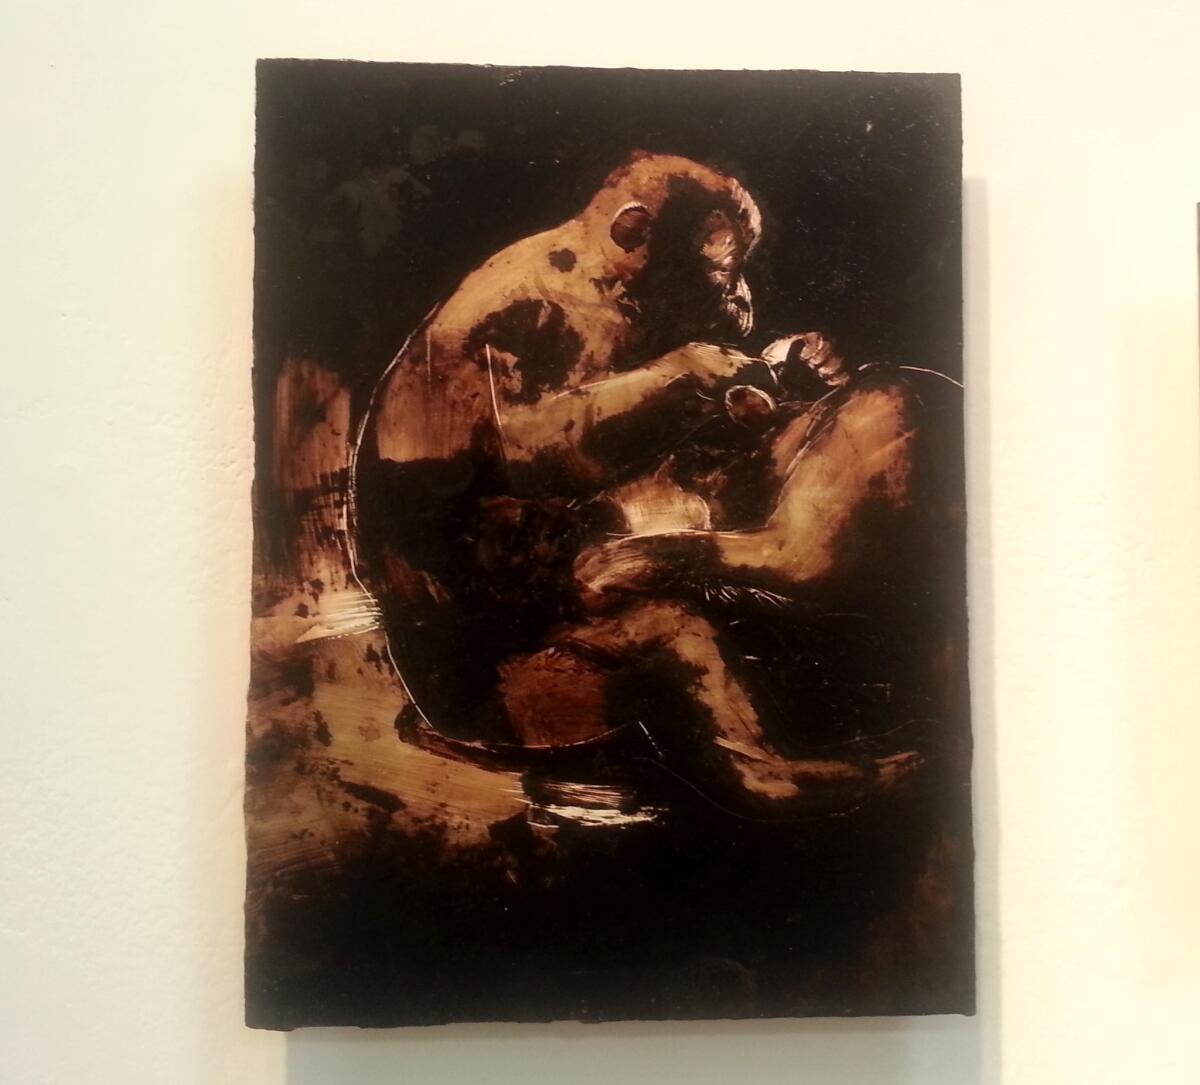 A painting of a pair of monkeys by James Griffith at Craig Krull Gallery in Santa Monica. Griffith used tar from the La Brea Tar Pits to create the work.